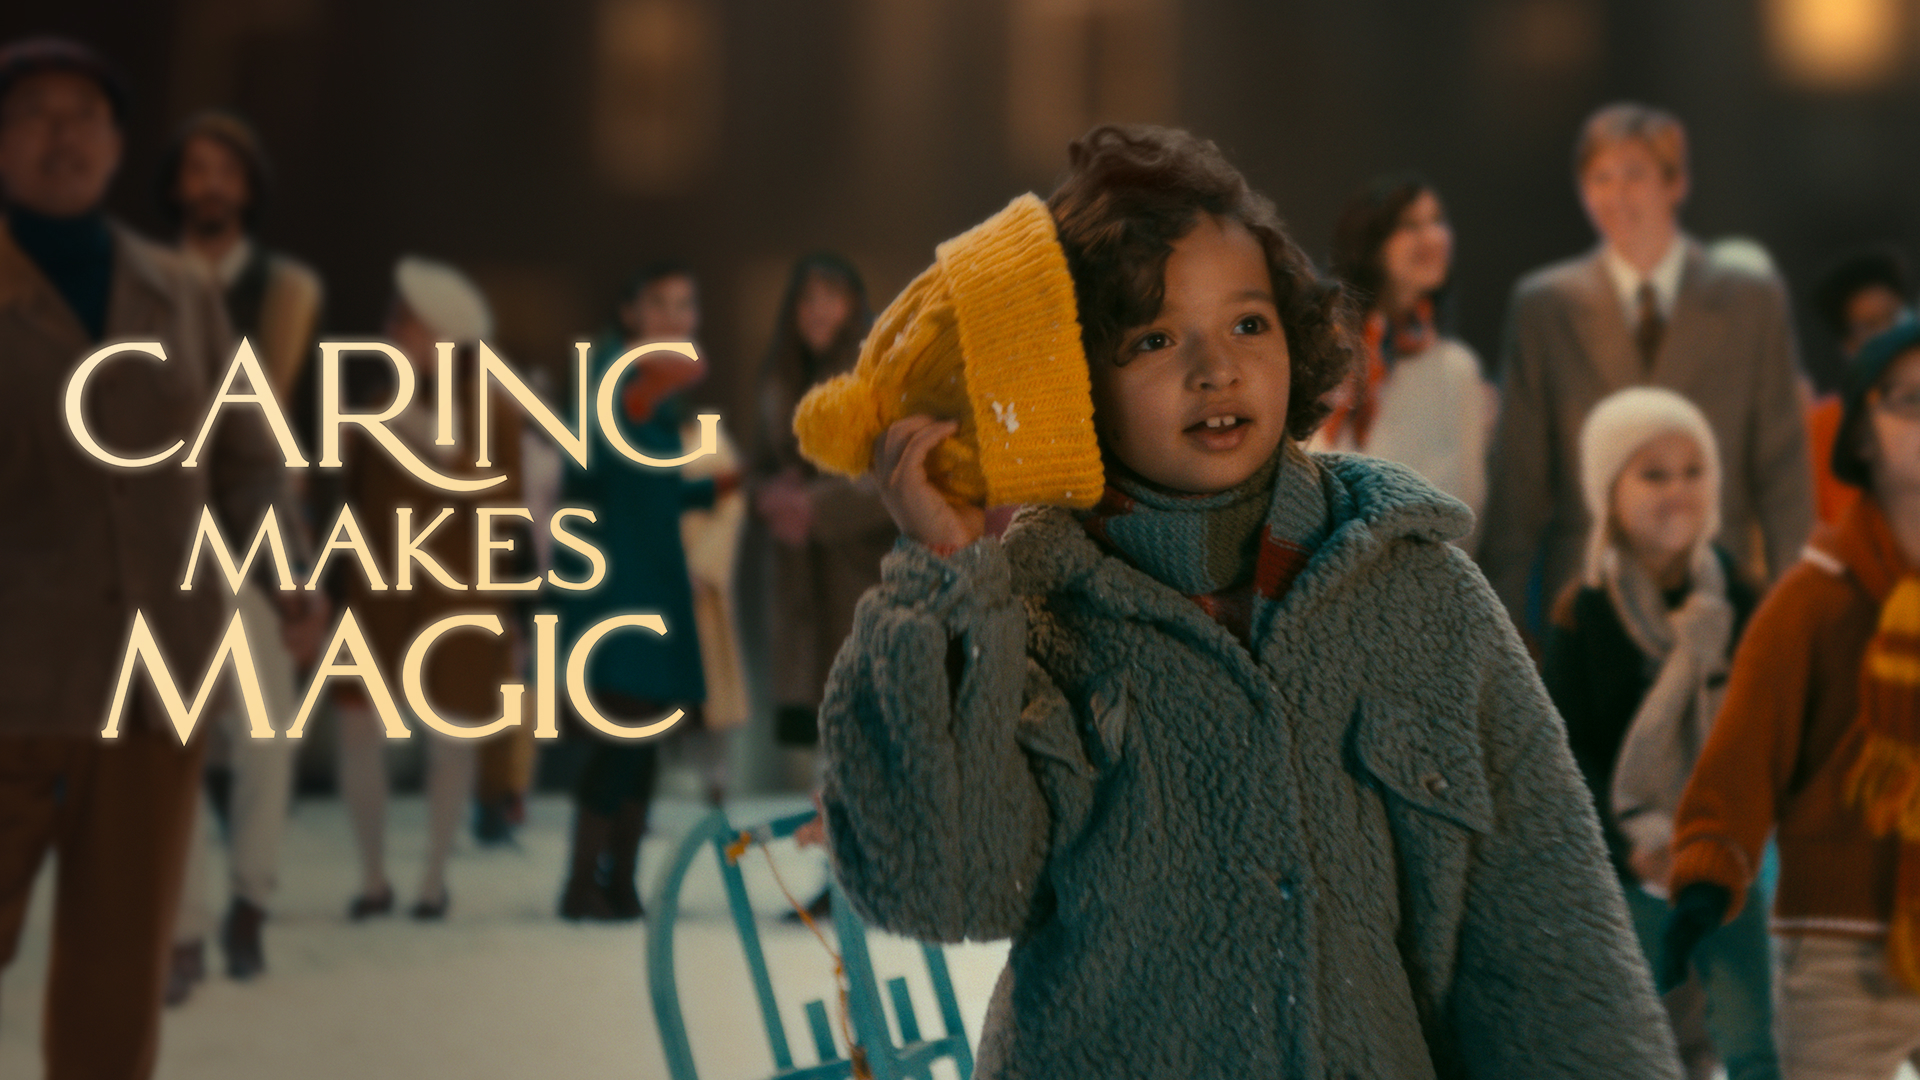 "Caring is Magic" in gently glowing golden letters, to the left of a  little girl, dressed for winter, pulling a knit cap from her head.  She looks on with wonder, along with other figures behind her. There is snow on the ground.